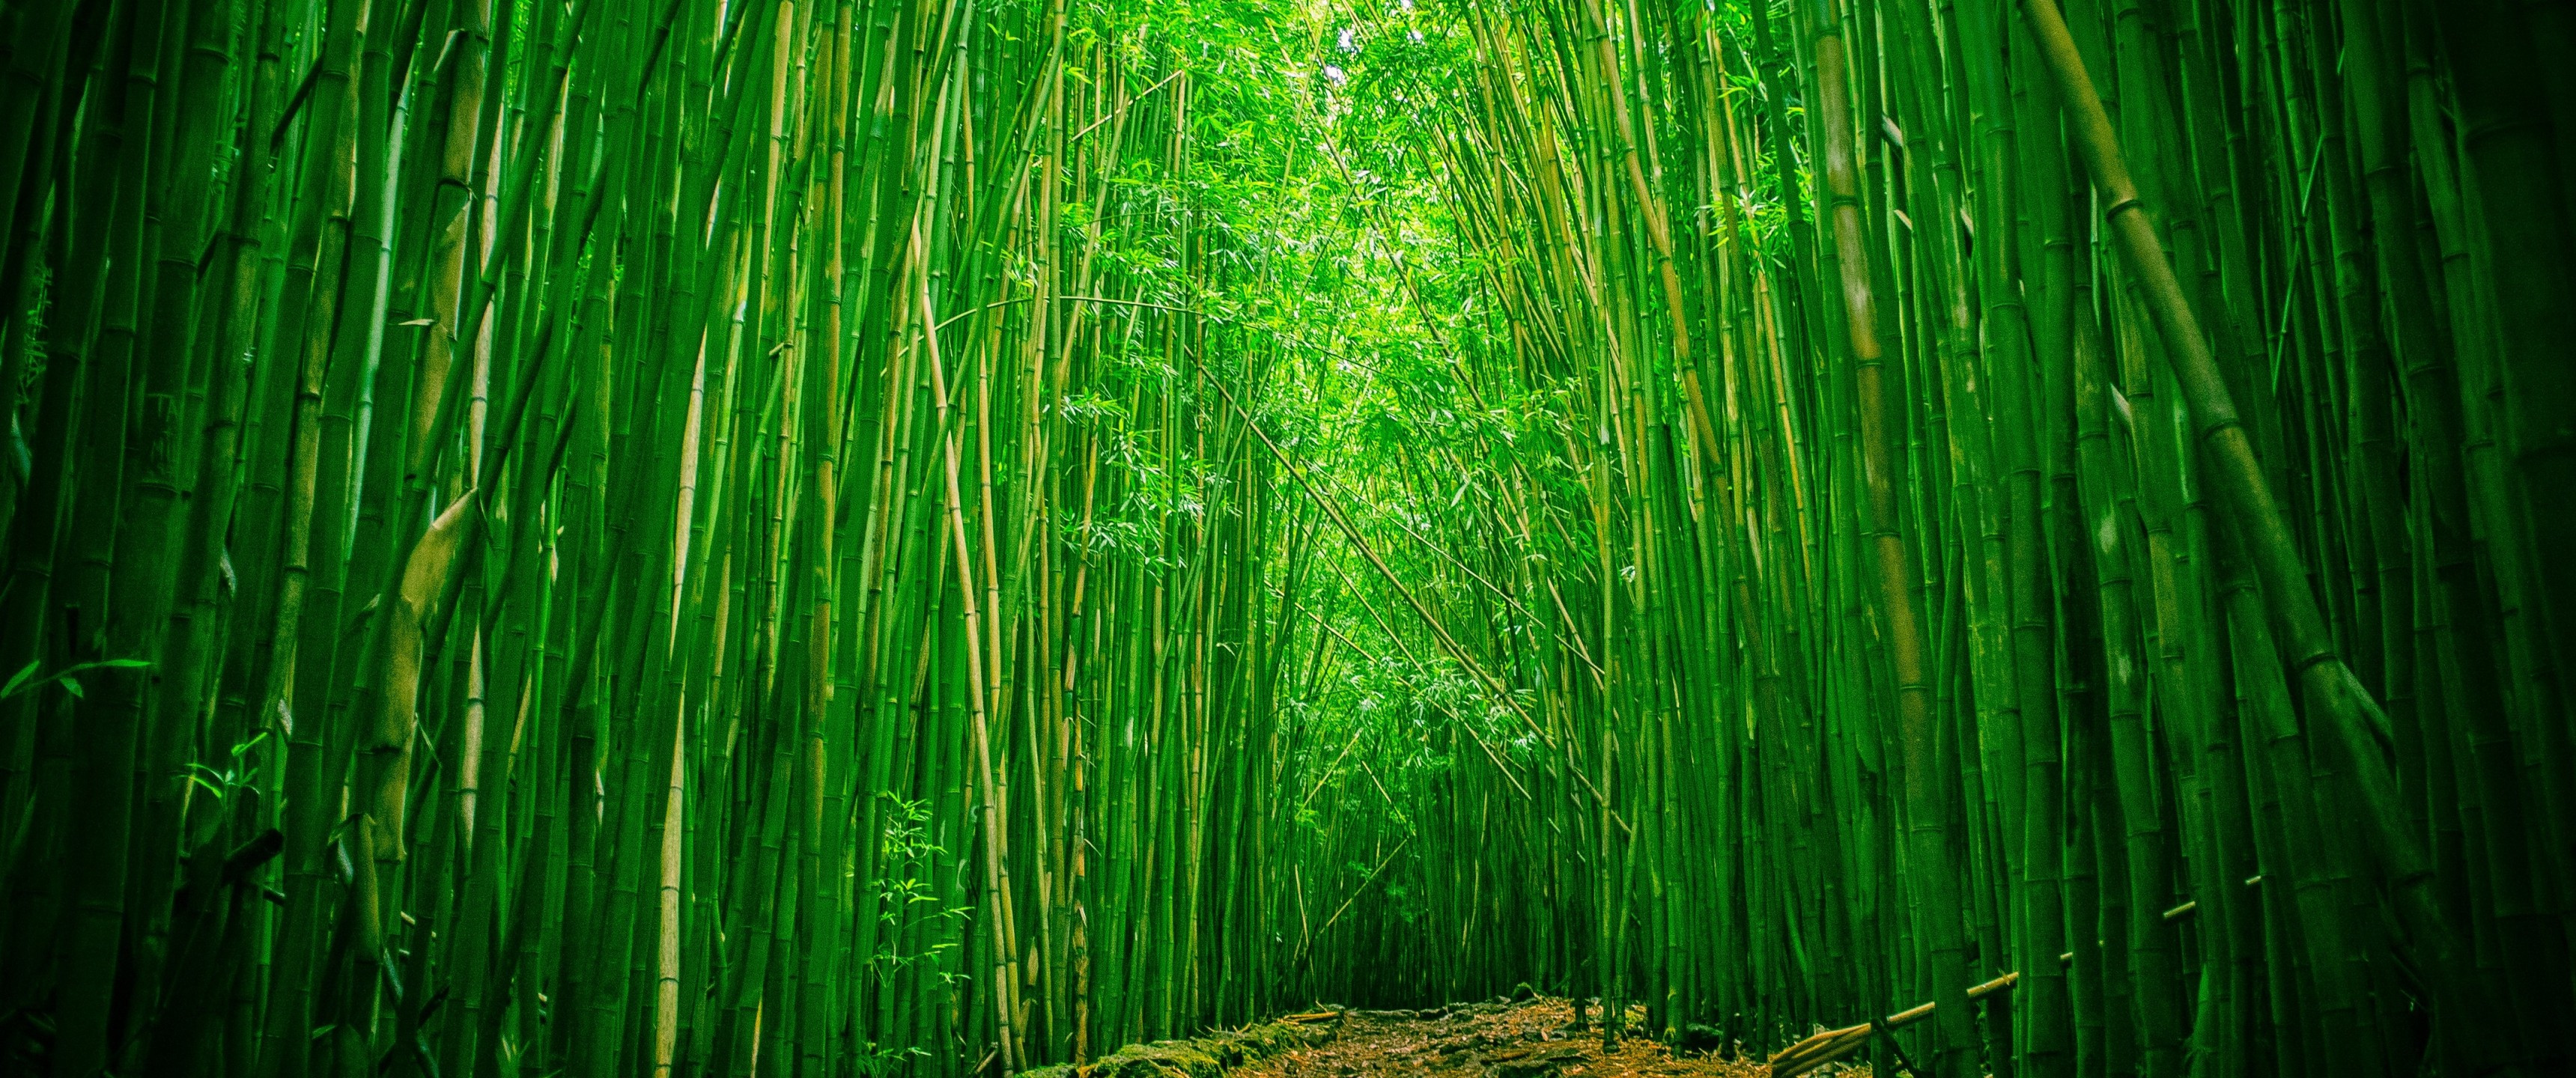 Download 3440x1440 Green Bamboo Forest Path Wallpapers 3440x1440